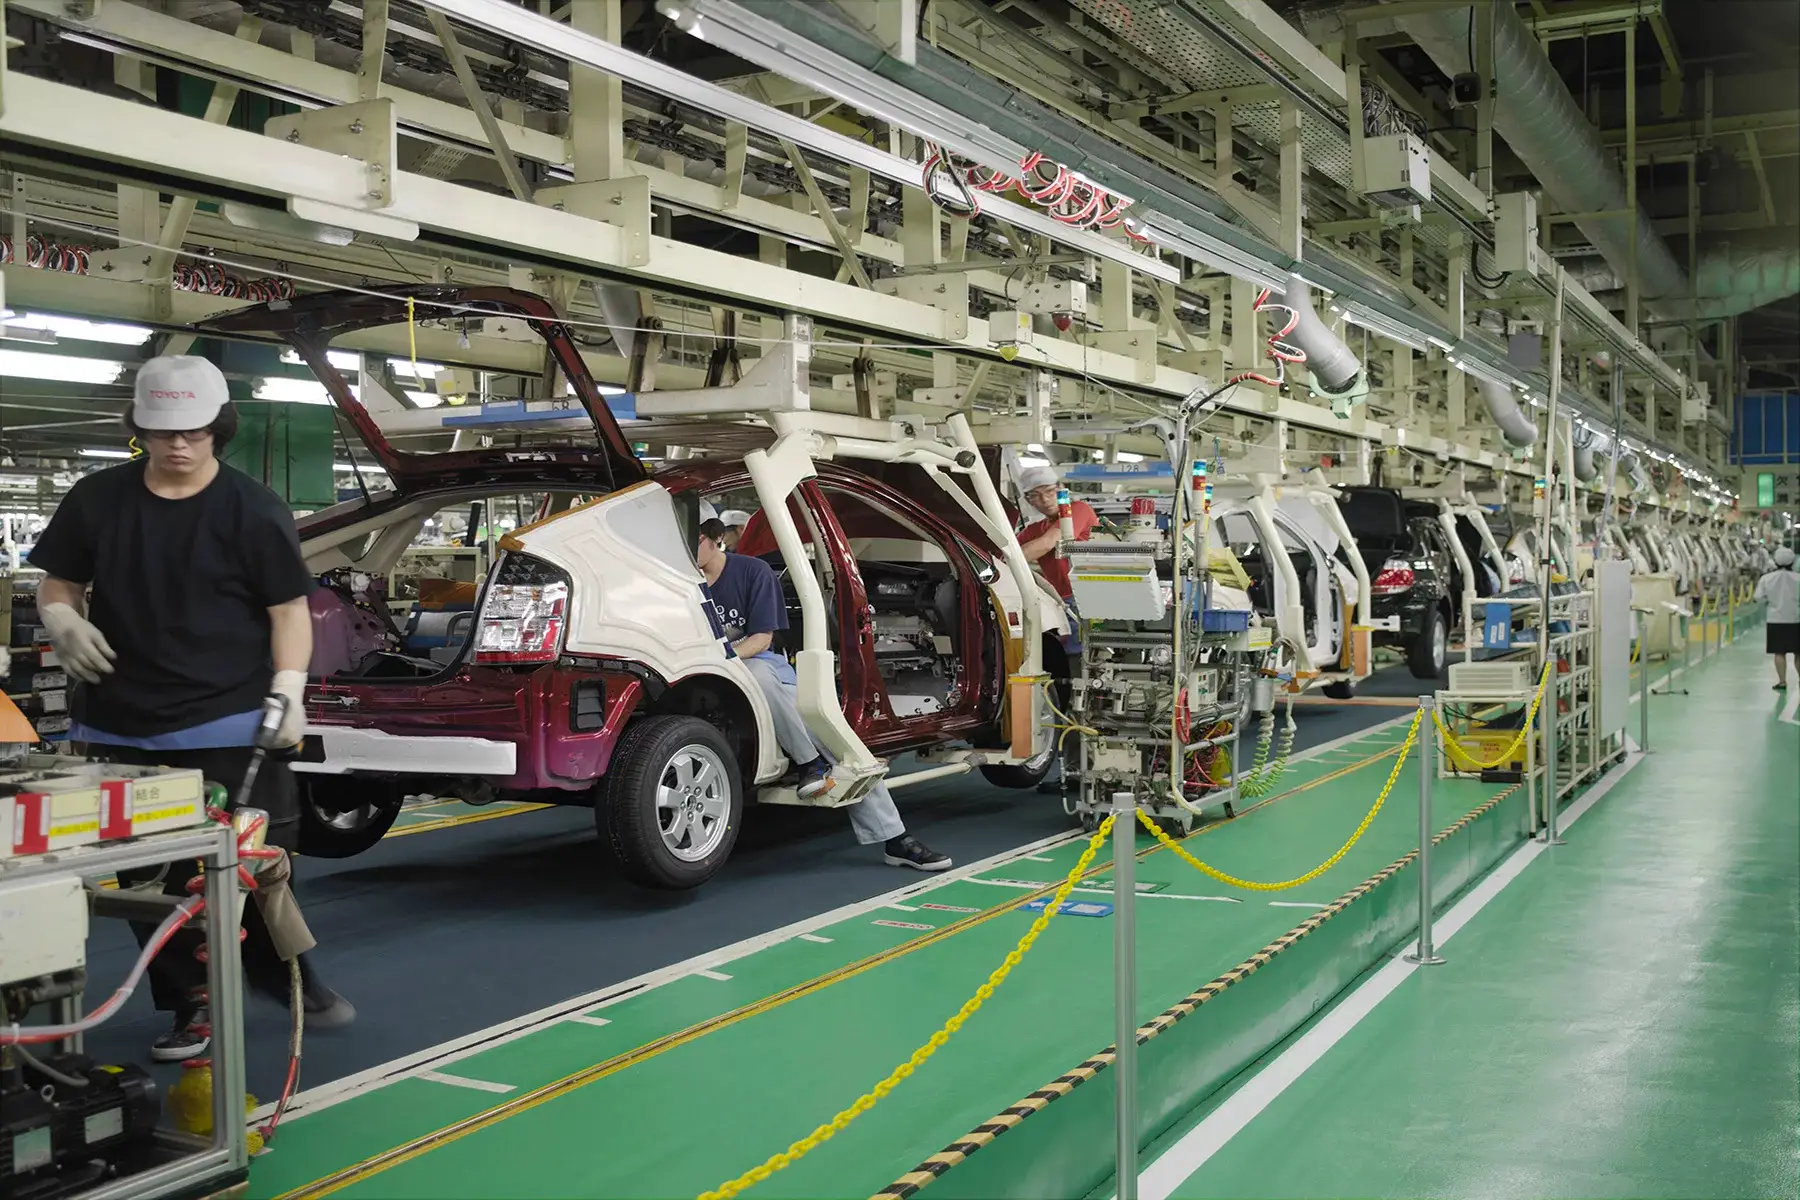 Workers assembling Toyota Prius cars in a factory in Japan